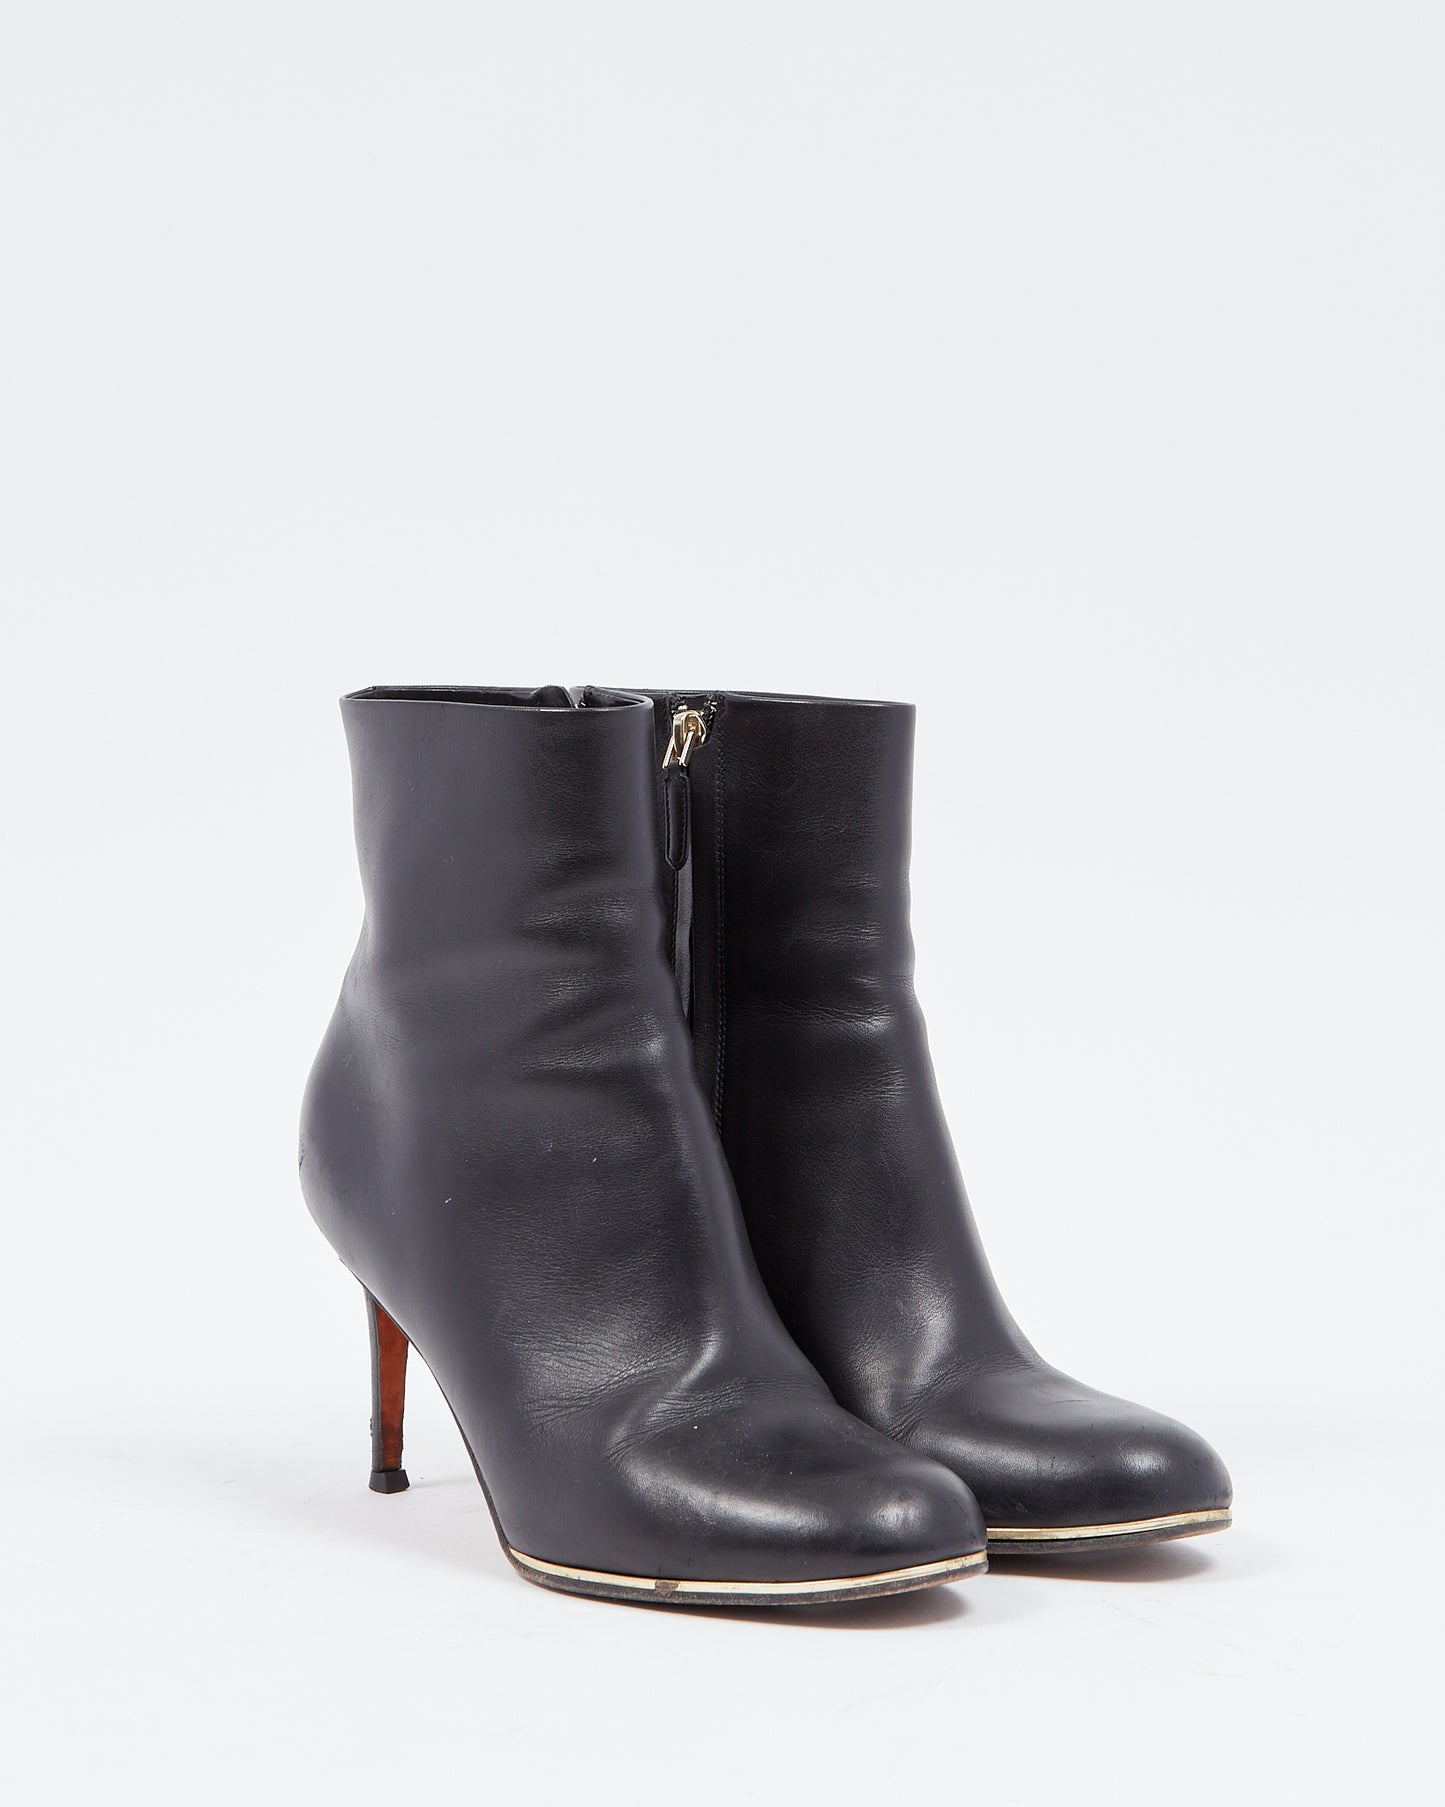 Givenchy Black Leather Gold Rim Heel Booties - 38